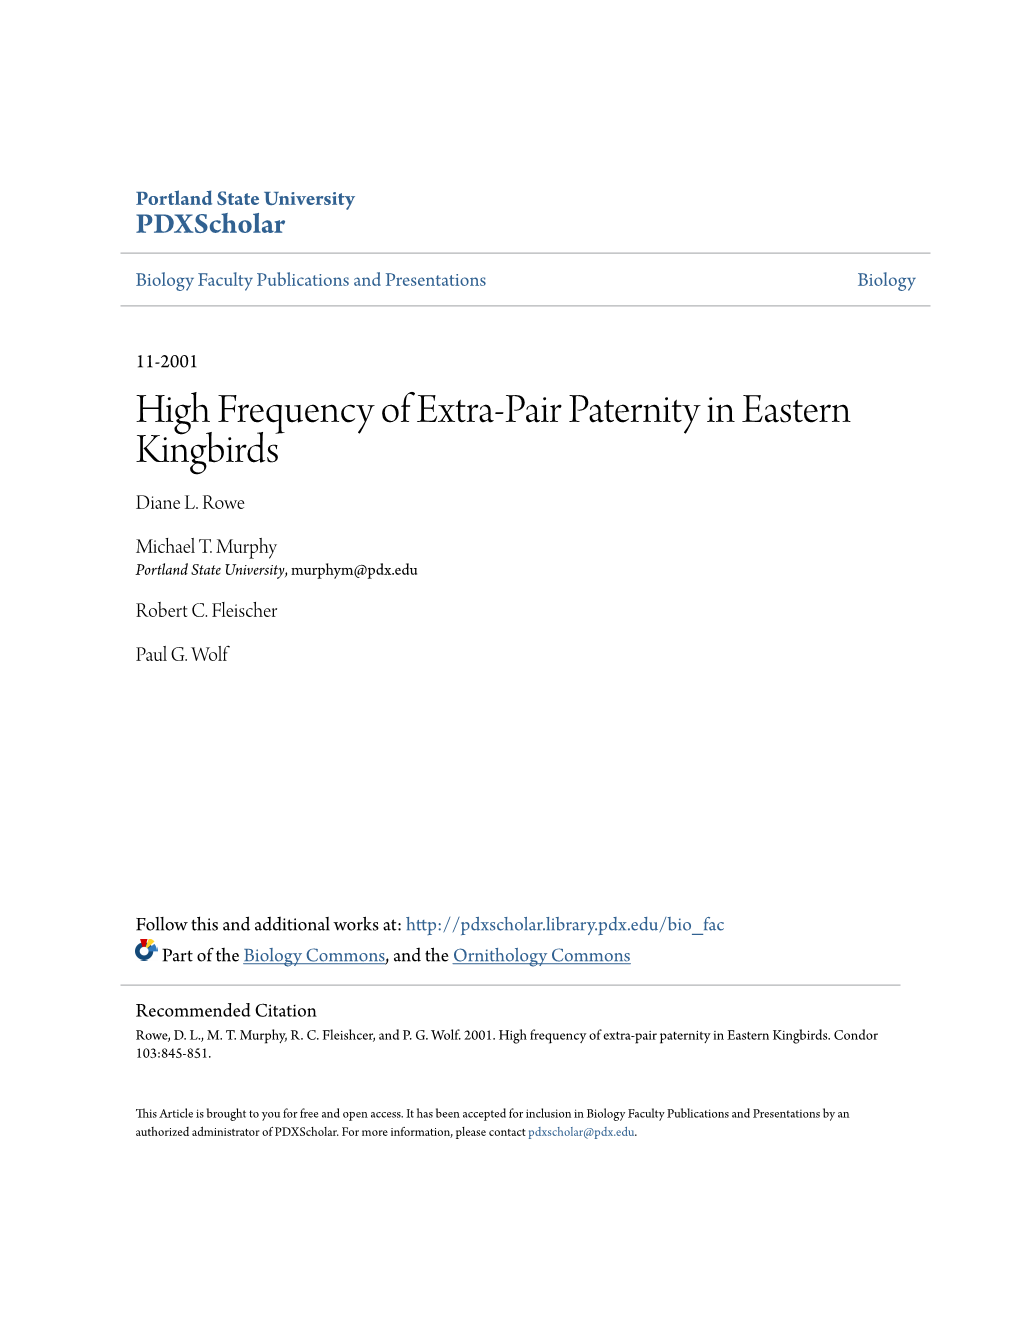 High Frequency of Extra-Pair Paternity in Eastern Kingbirds Diane L